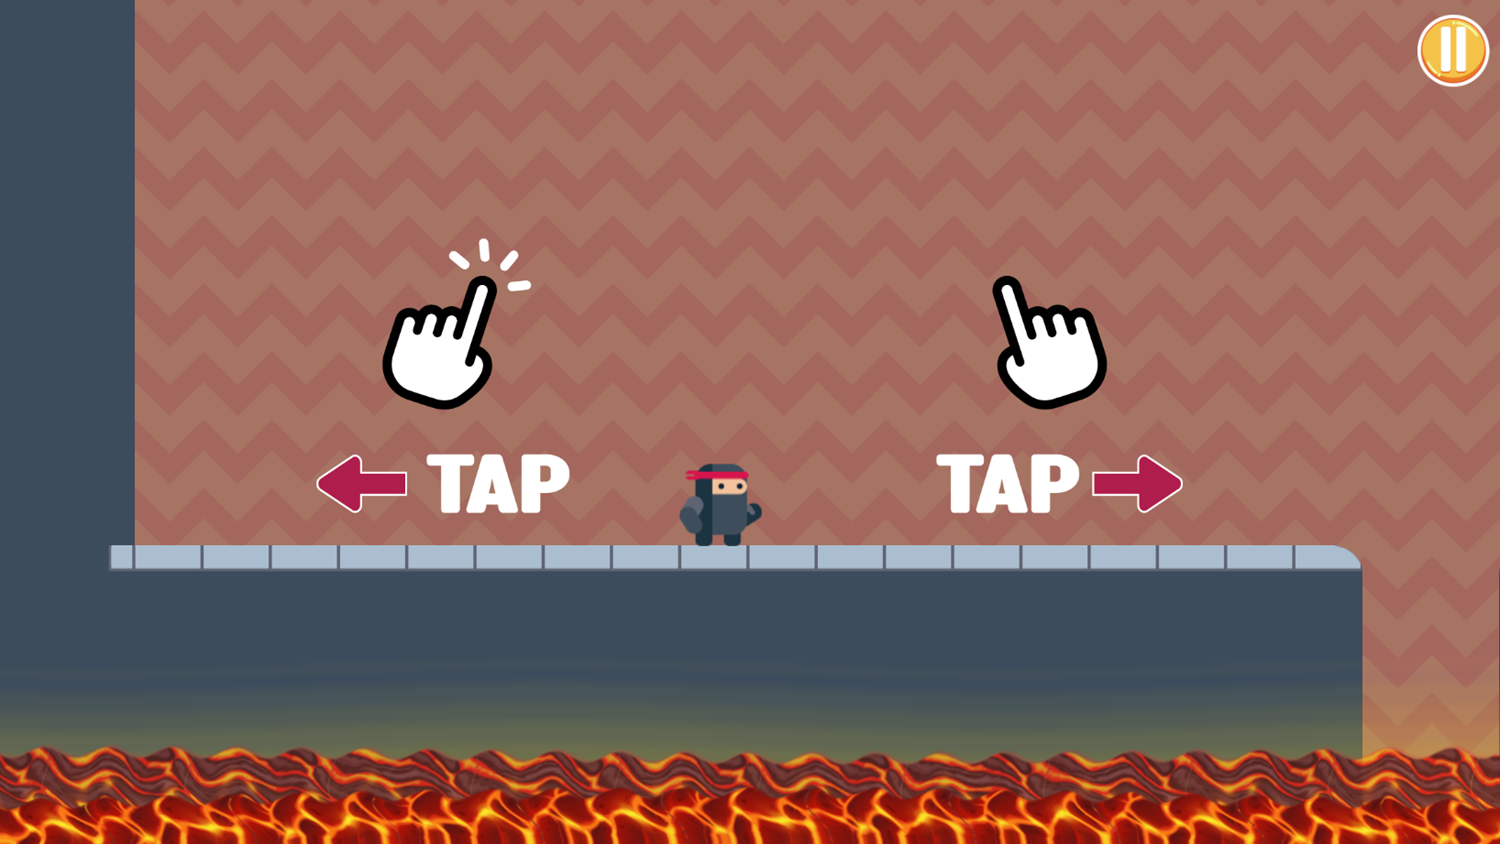 Floor is Lava Game How to Play Screen Screenshot.